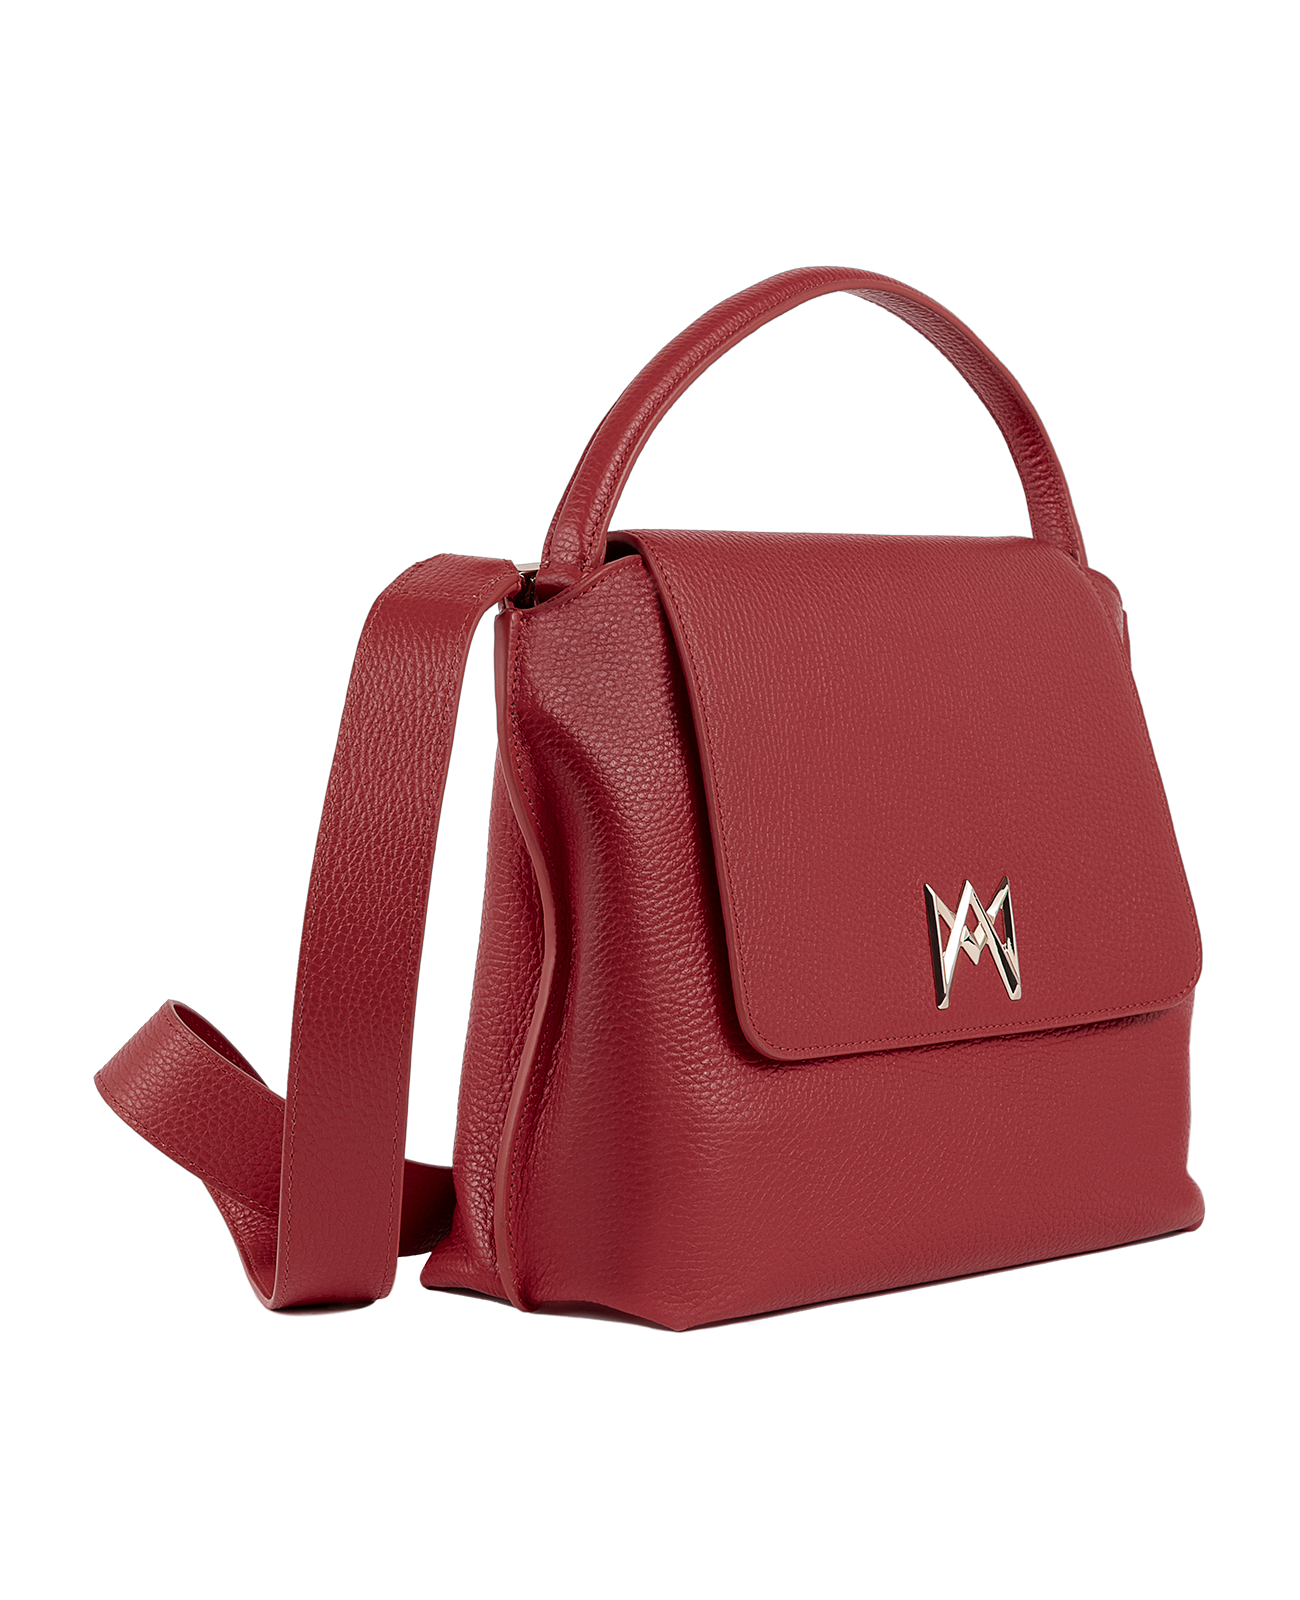 AMA Bags: Cross-body bag in Italian full-grain leather, semi-aniline calf Italian leather with detachable shoulder strap.Three compartments, zip pocket in the back compartment. Magnetic flap closure with logo. Color: Dark Red. Size:Large